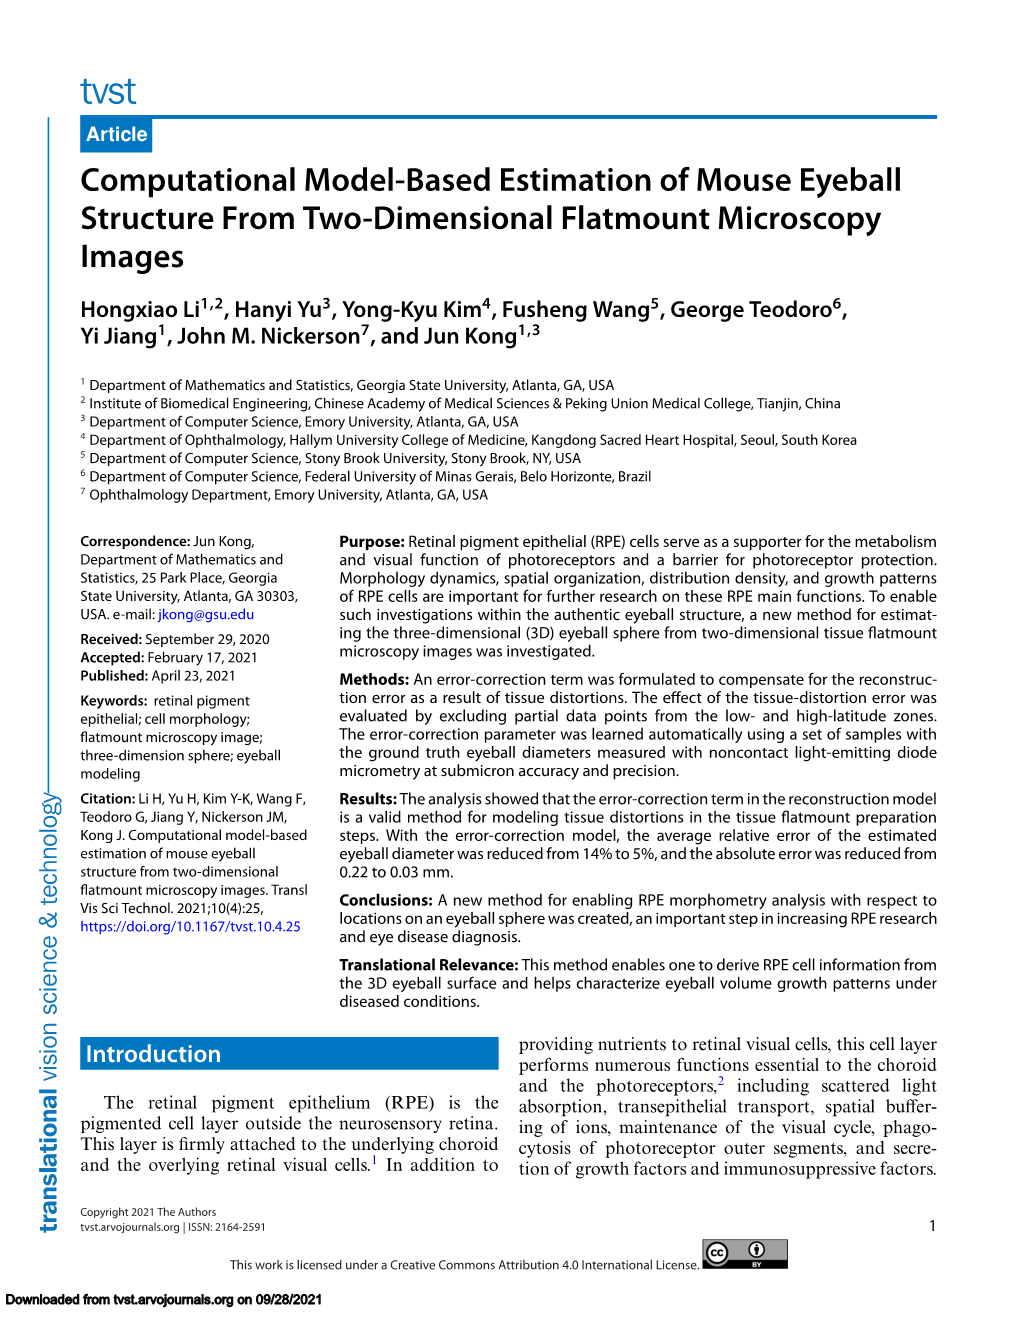 Computational Model-Based Estimation of Mouse Eyeball Structure from Two-Dimensional Flatmount Microscopy Images